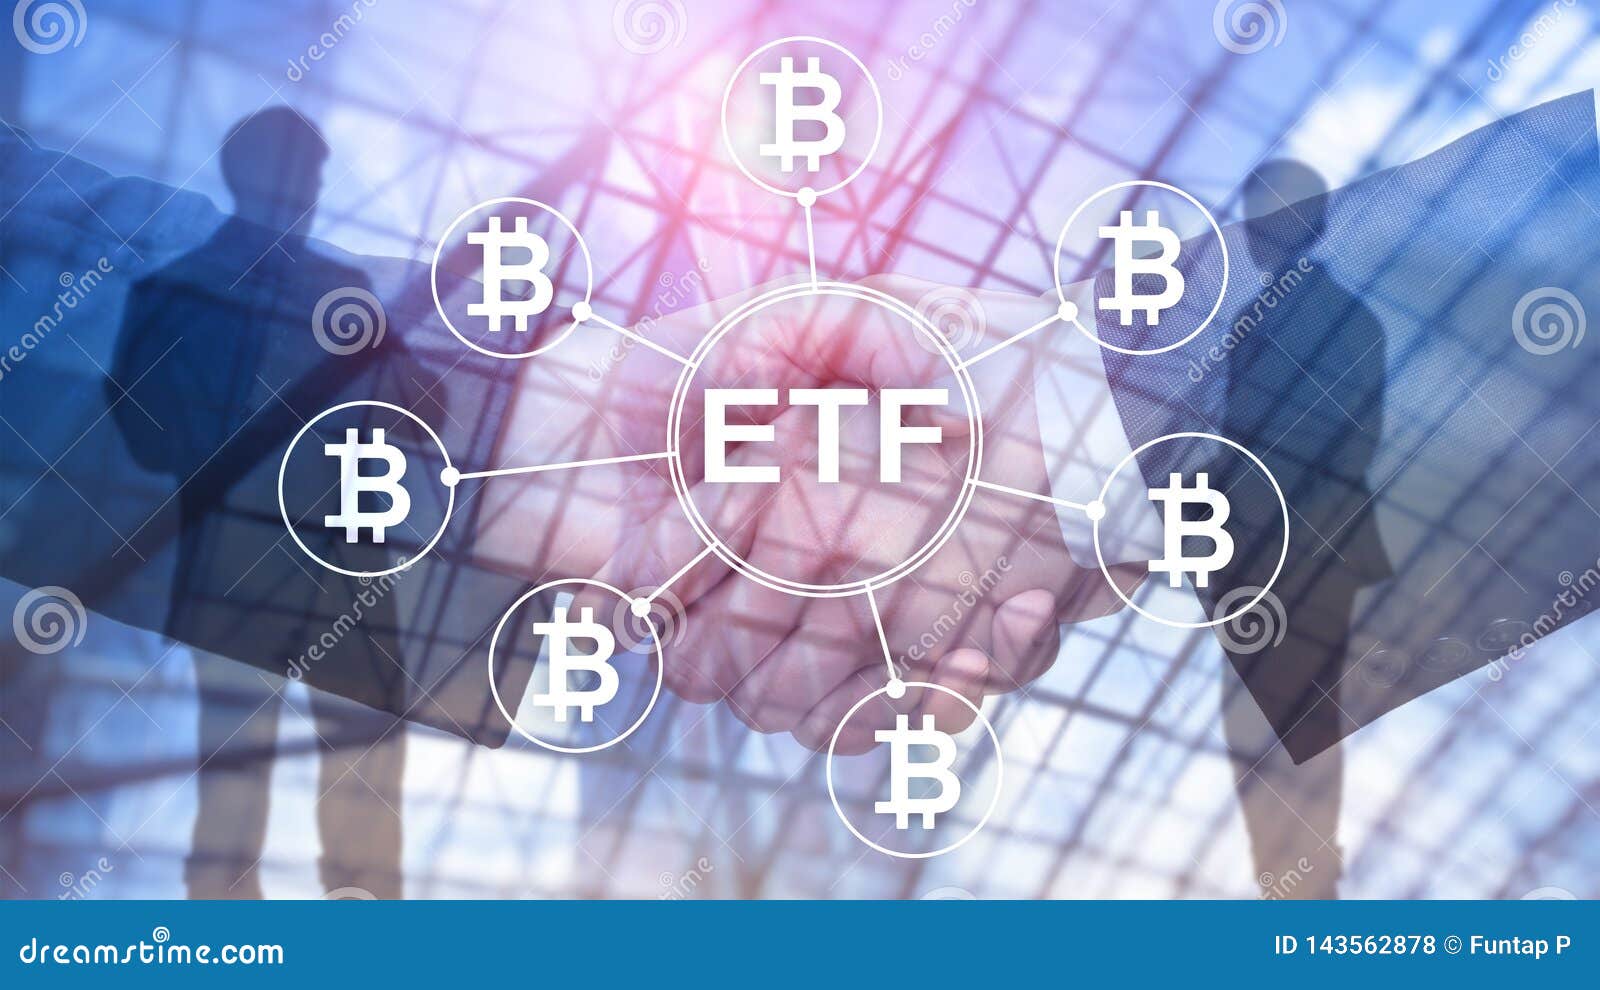 etf with bitcoin exposure